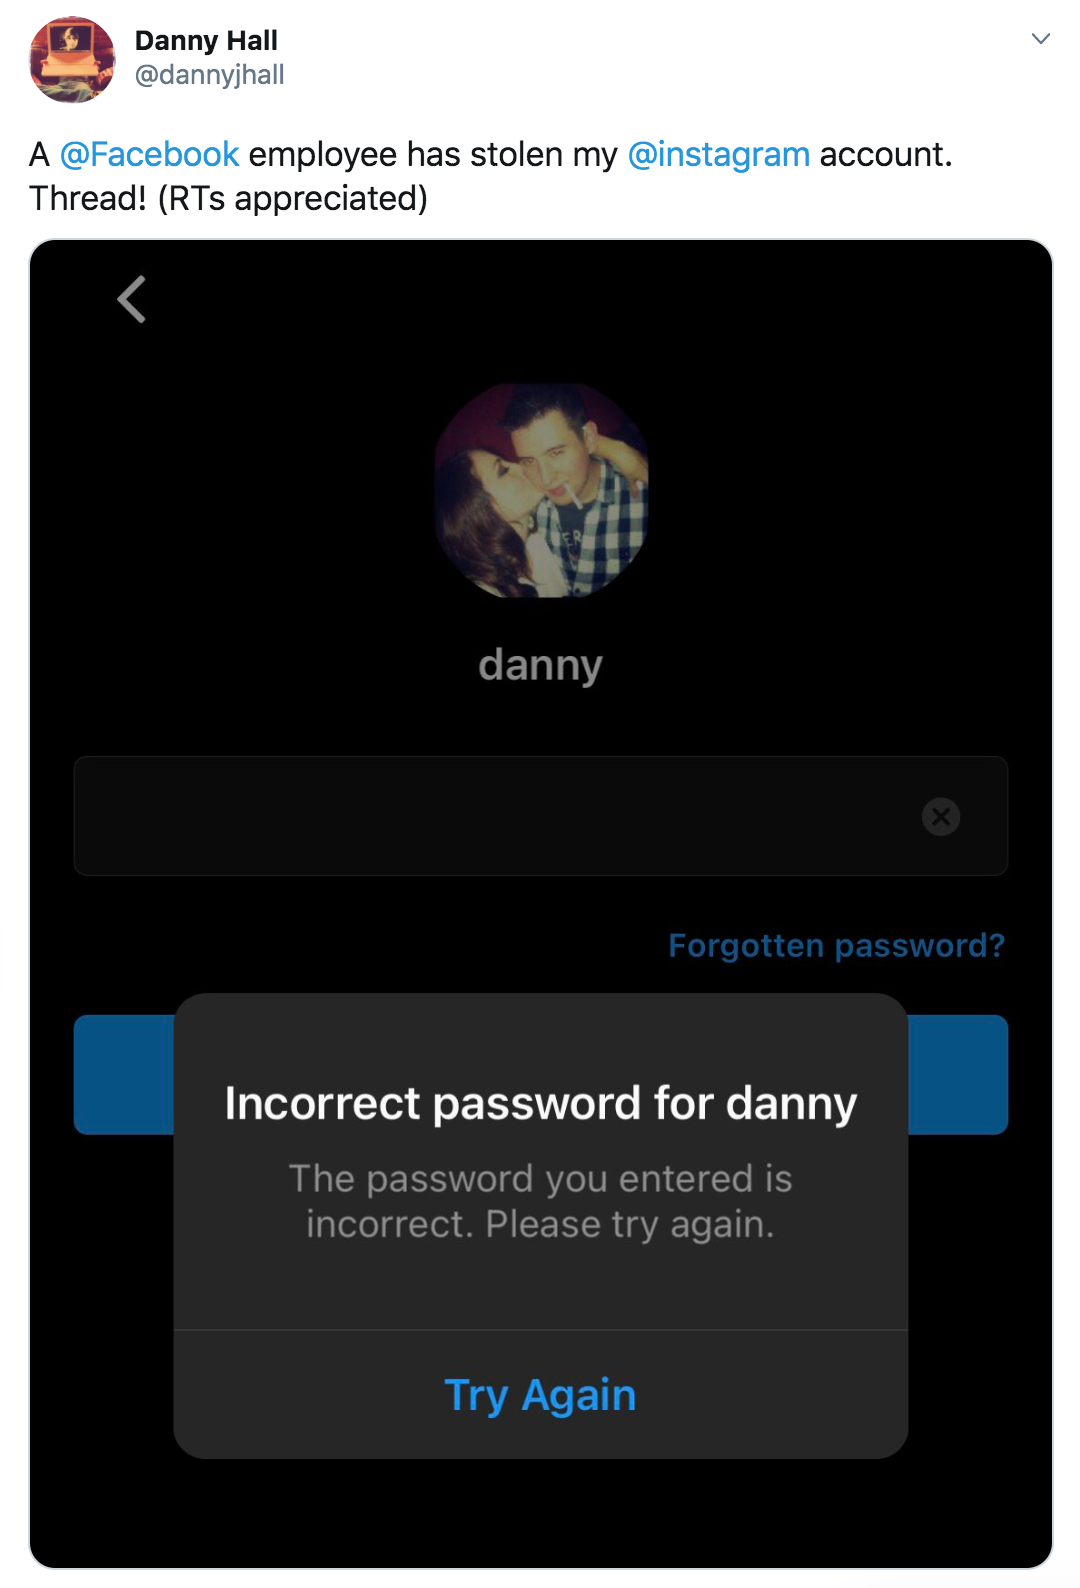 screenshot - Danny Hall A employee has stolen my account. Thread! RTs appreciated danny Forgotten password? Incorrect password for danny The password you entered is incorrect. Please try again. Try Again